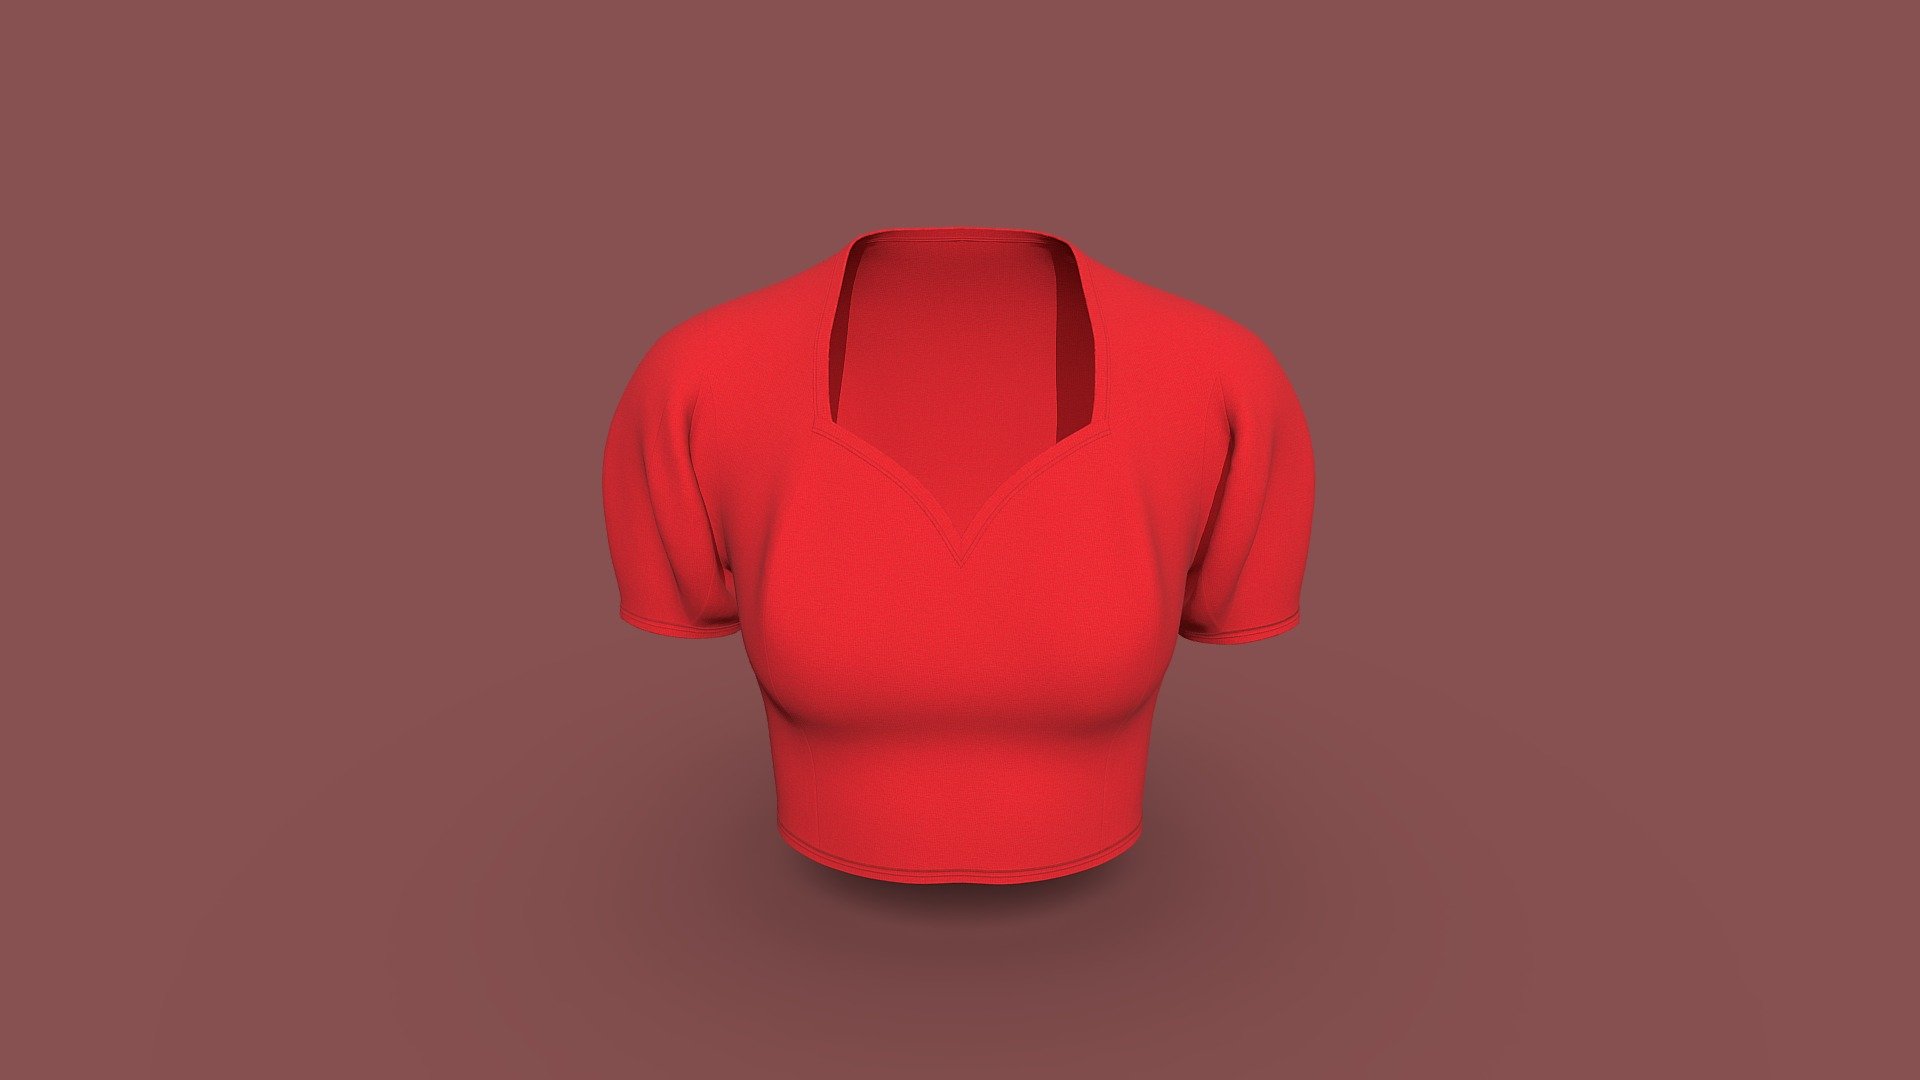 Cloth Title = Sporty Bra Design  

SKU = DG100115 

Category = Women 

Product Type = Bra 

Cloth Length = Regular 

Body Fit = Regular Fit 

Occasion = Beach 

Sleeve Style = Set In Sleeve 


Our Services:

3D Apparel Design.

OBJ,FBX,GLTF Making with High/Low Poly.

Fabric Digitalization.

Mockup making.

3D Teck Pack.

Pattern Making.

2D Illustration.

Cloth Animation and 360 Spin Video.


Contact us:- 

Email: info@digitalfashionwear.com 

Website: https://digitalfashionwear.com 

WhatsApp No: +8801759350445 


We designed all the types of cloth specially focused on product visualization, e-commerce, fitting, and production. 

We will design: 

T-shirts 

Polo shirts 

Hoodies 

Sweatshirt 

Jackets 

Shirts 

TankTops 

Trousers 

Bras 

Underwear 

Blazer 

Aprons 

Leggings 

and All Fashion items. 





Our goal is to make sure what we provide you, meets your demand 3d model